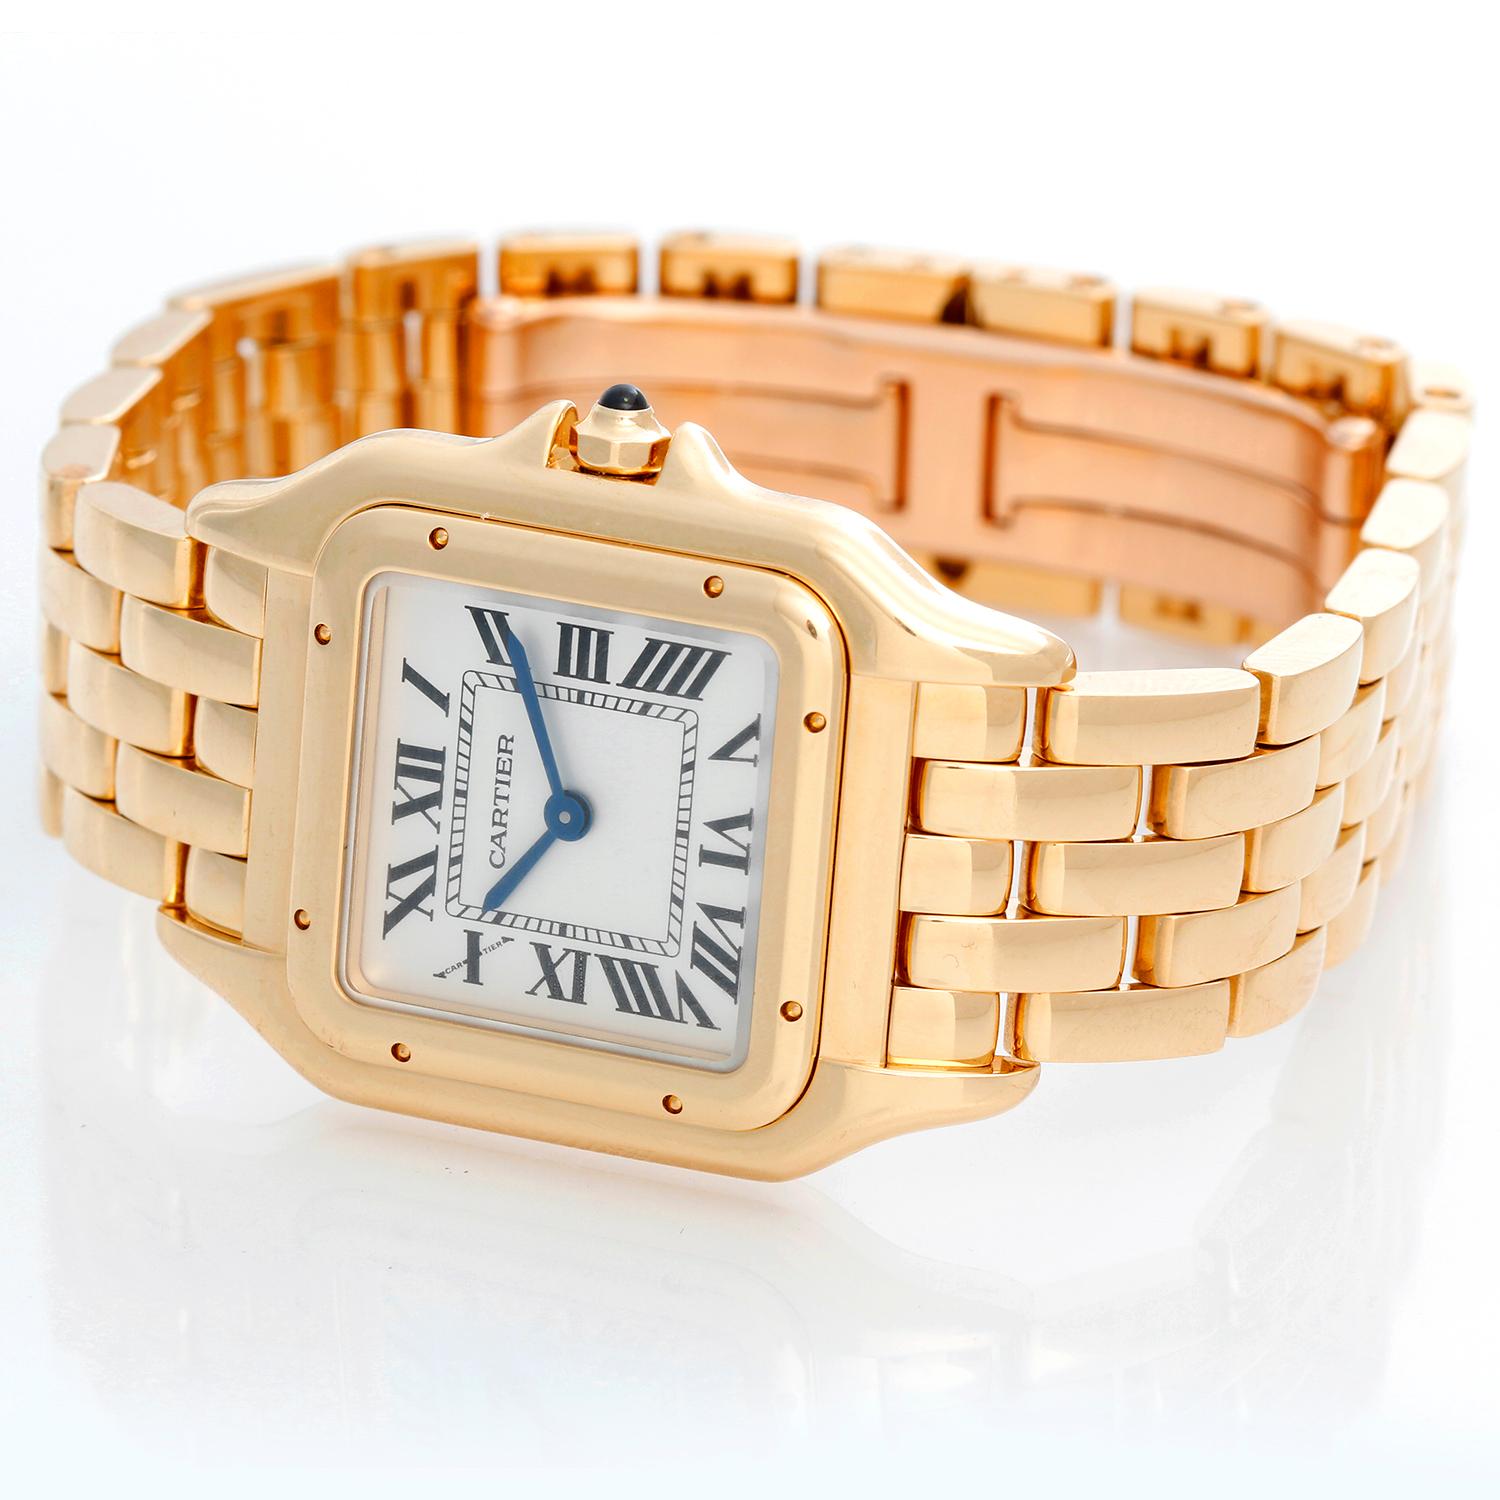 Cartier Panther 18k Yellow Gold Midsize Watch WGPN0009 - Quartz movement. 18k yellow gold case (27 x 37 mm). Silver dial with black Roman numerals. 18k yellow gold Cartier bracelet with deployant clasp. Pre-owned with Cartier box and books. Current